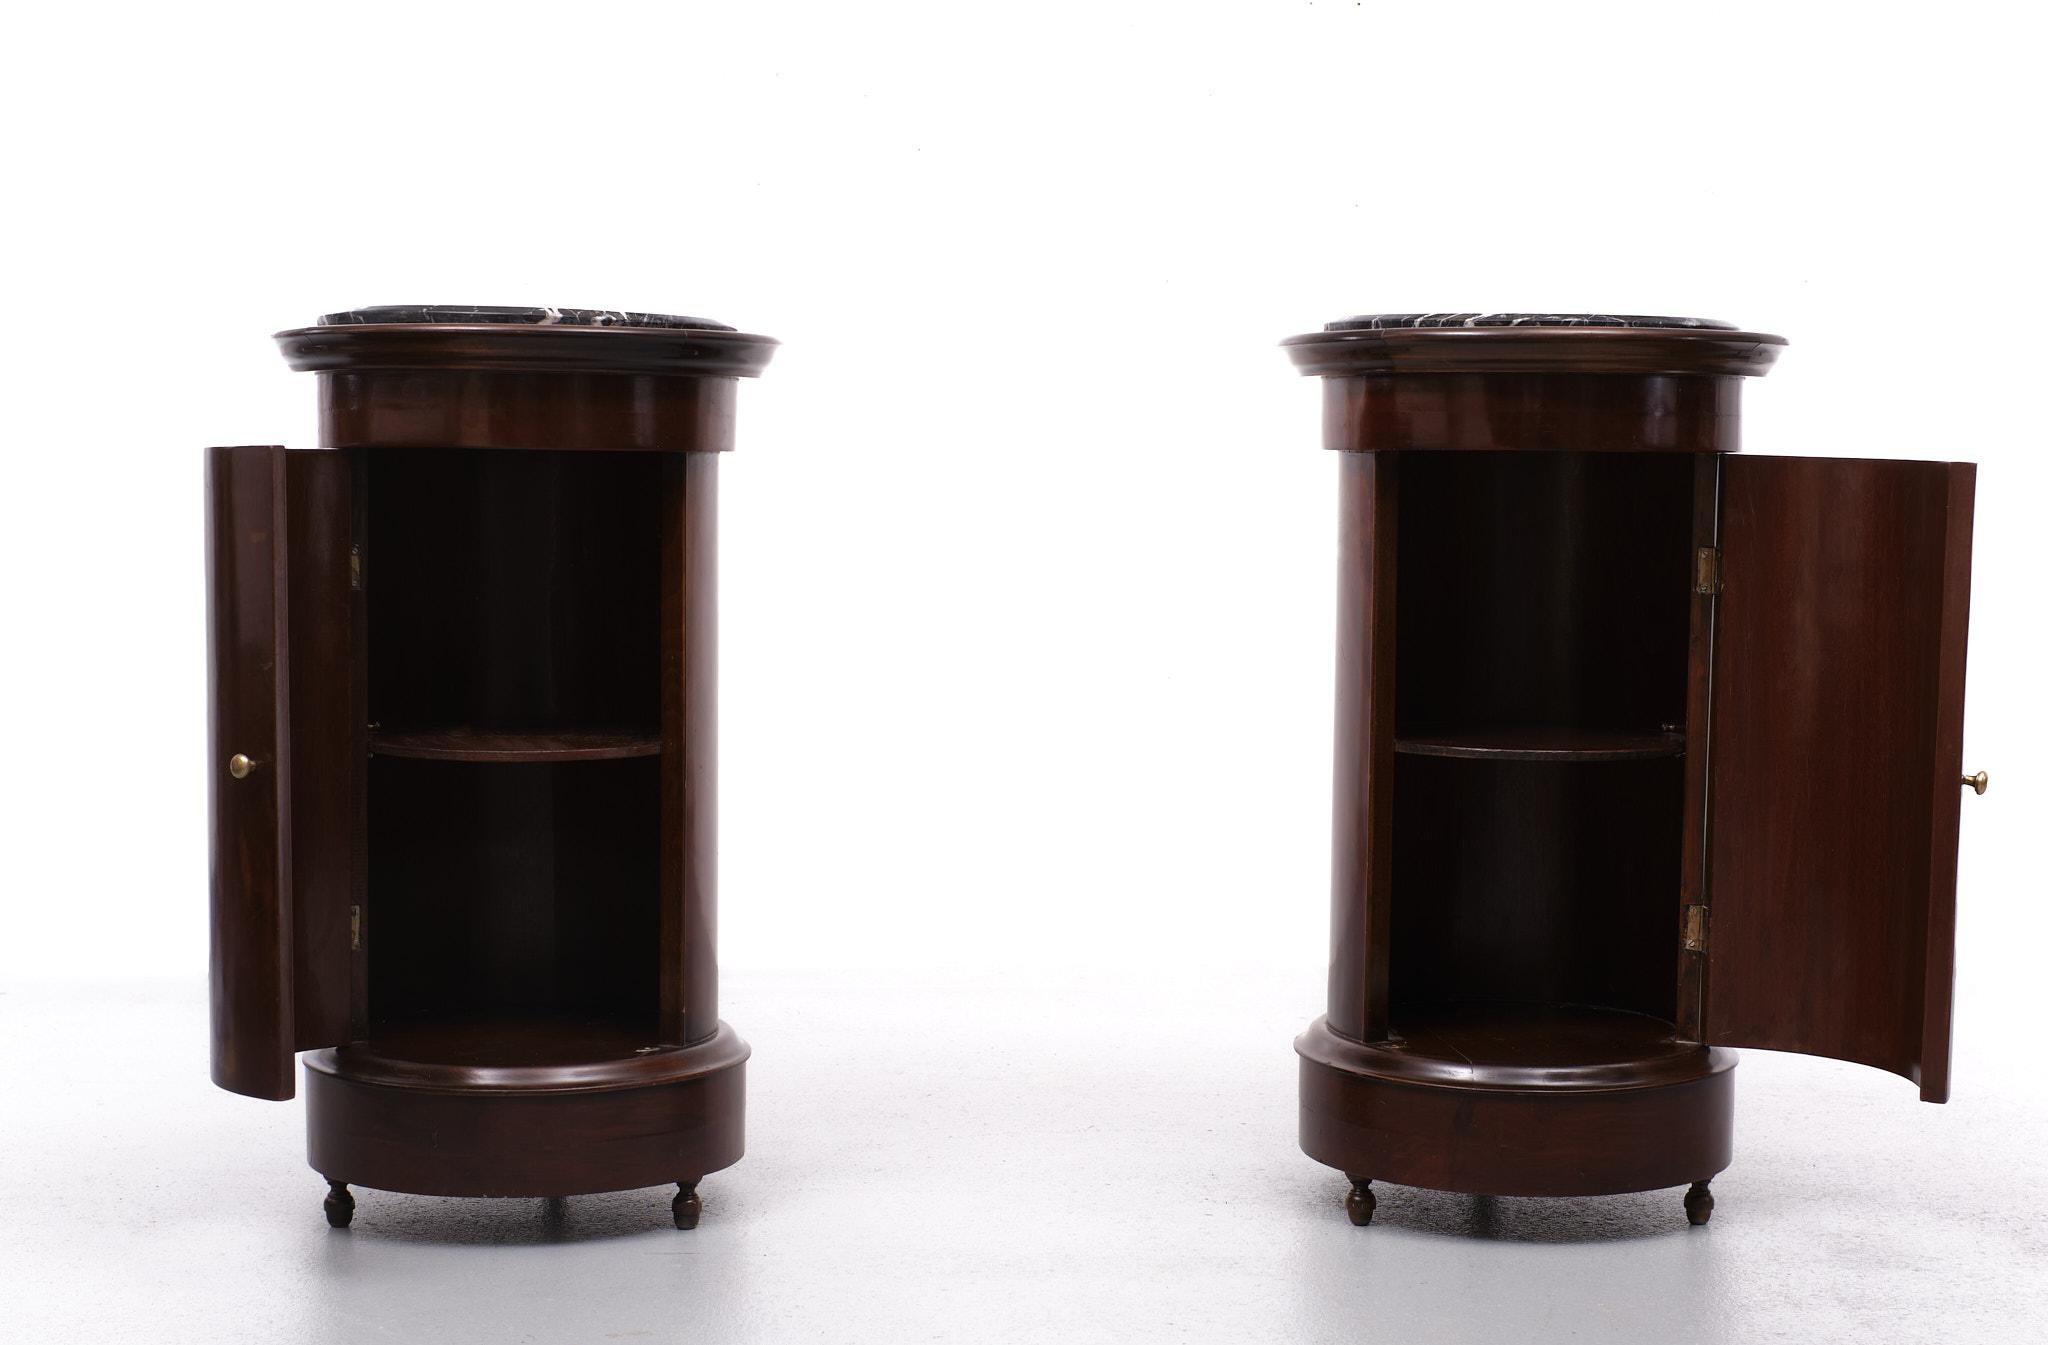 Set of Antique Cylindrical Nightstands 1880s England  For Sale 2